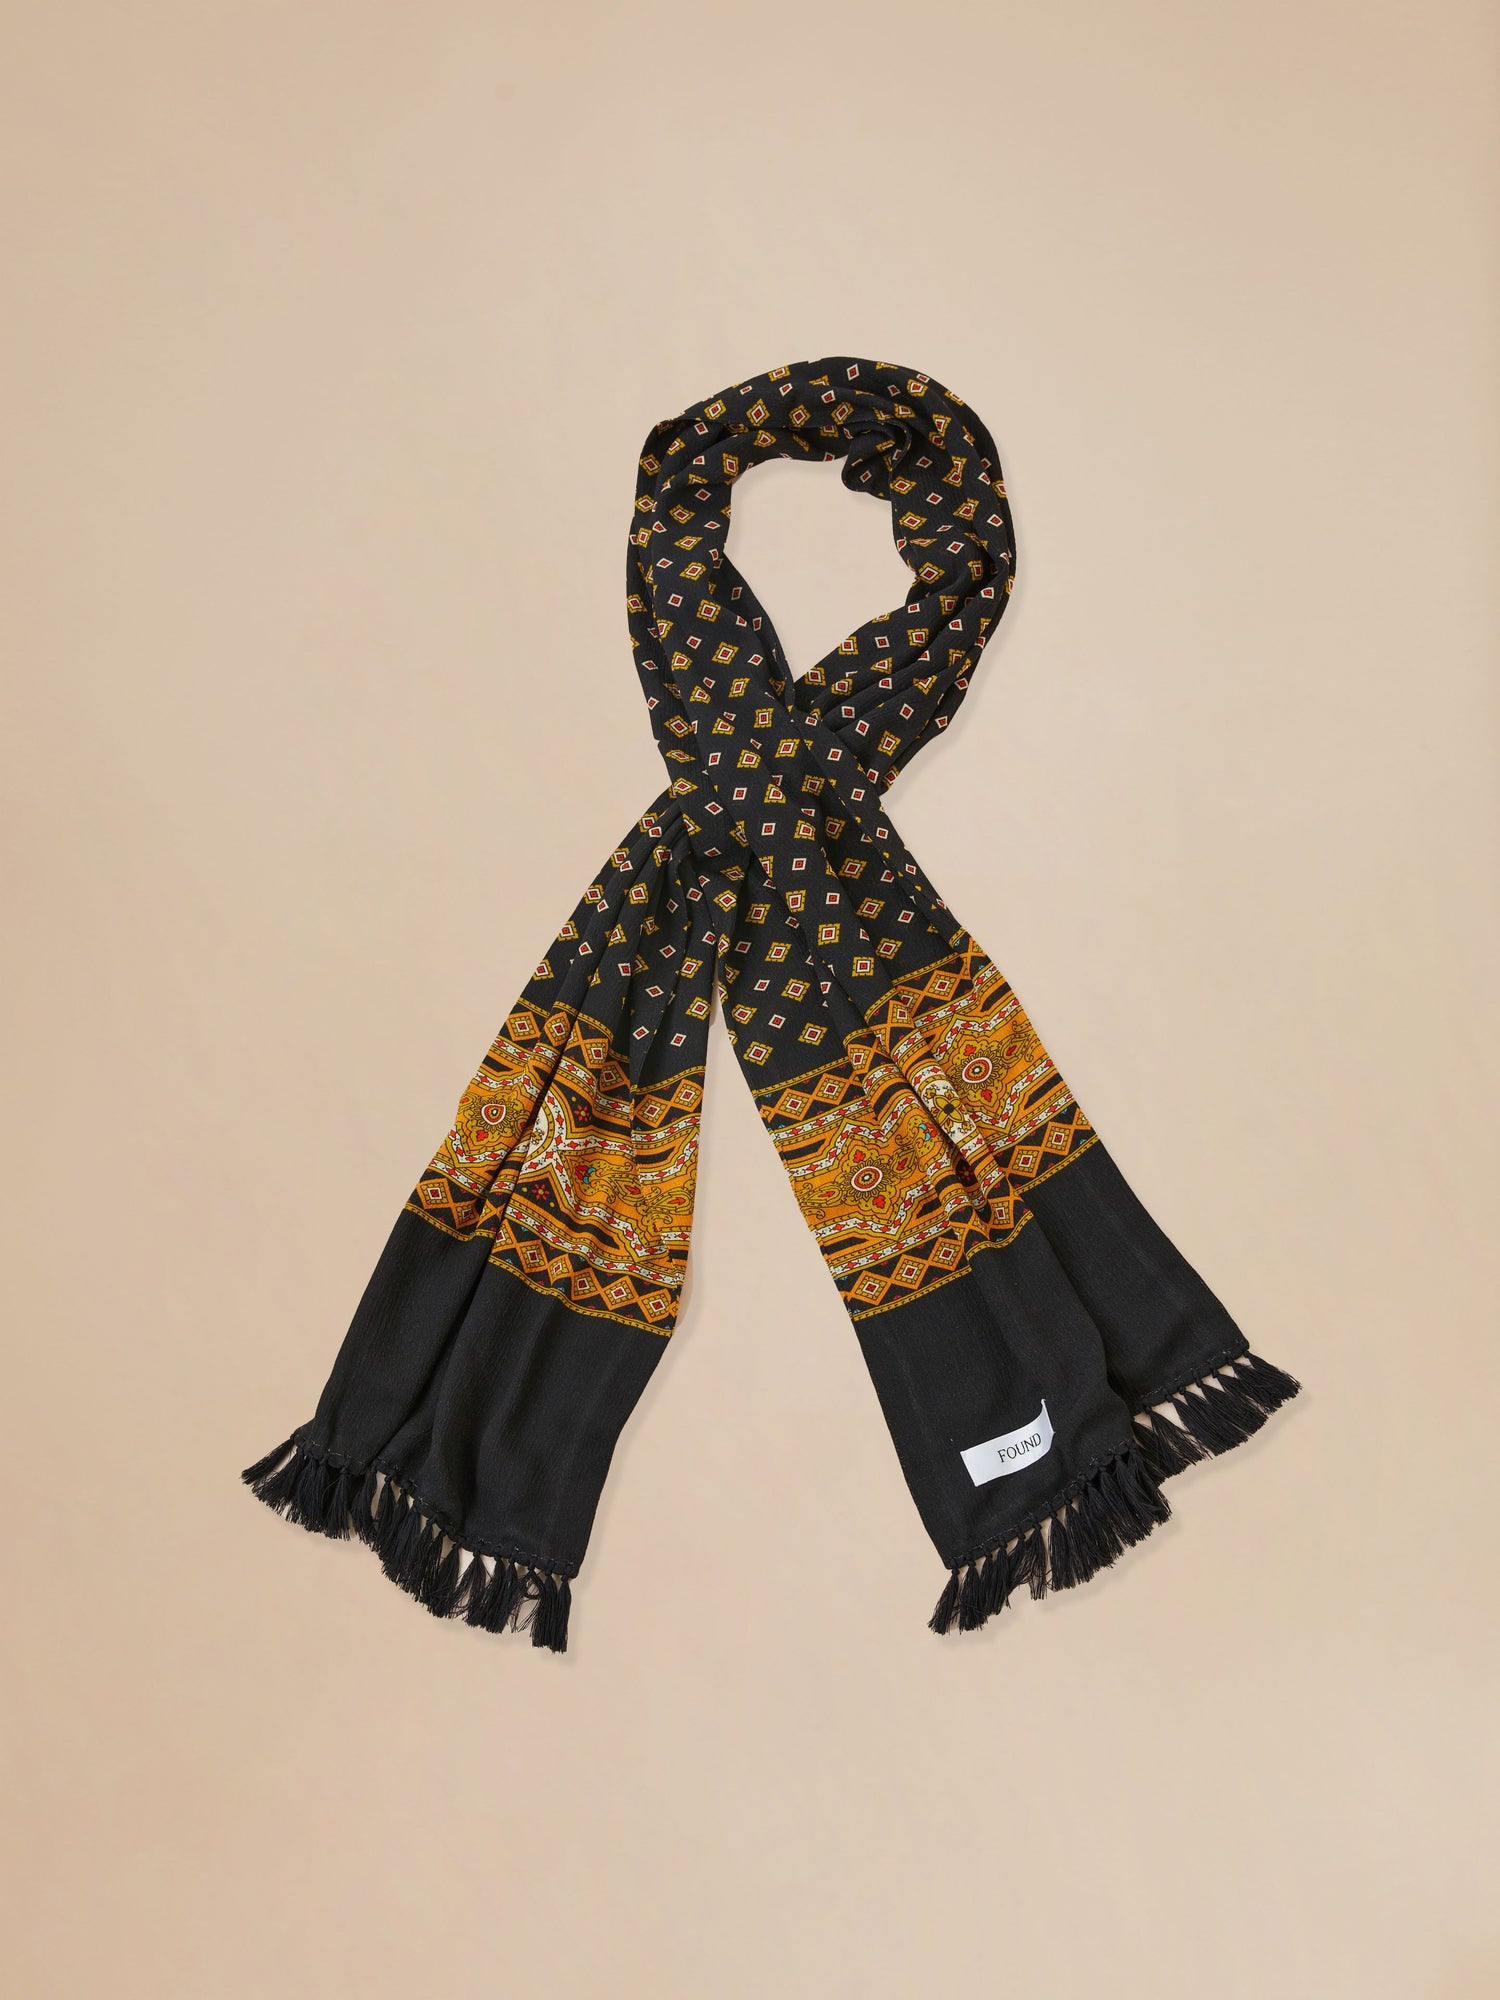 A black and yellow Coming Soon | Pastures Print Scarf with tassels from Found.